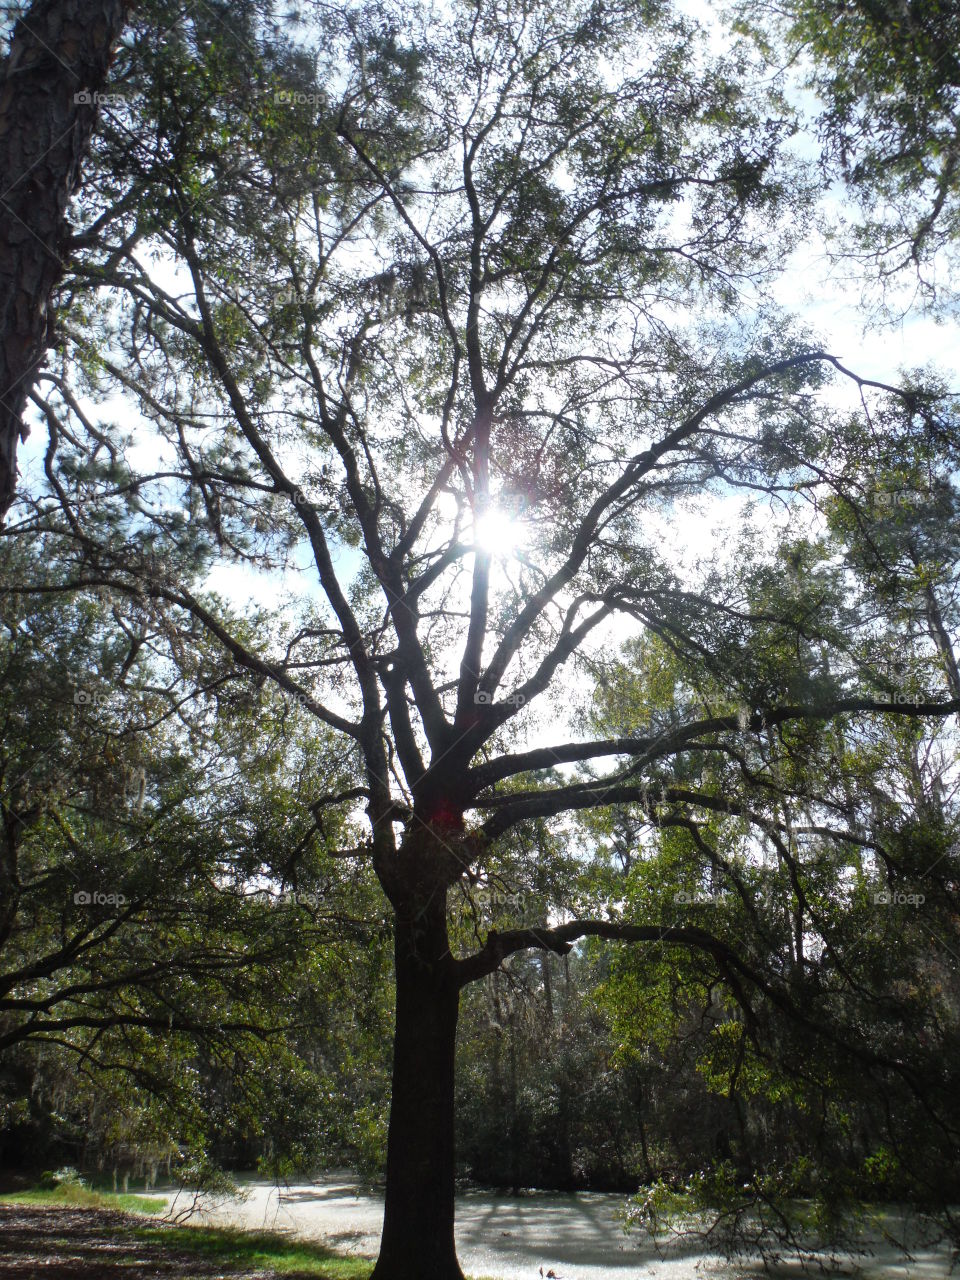 outstretched limbs to the sun